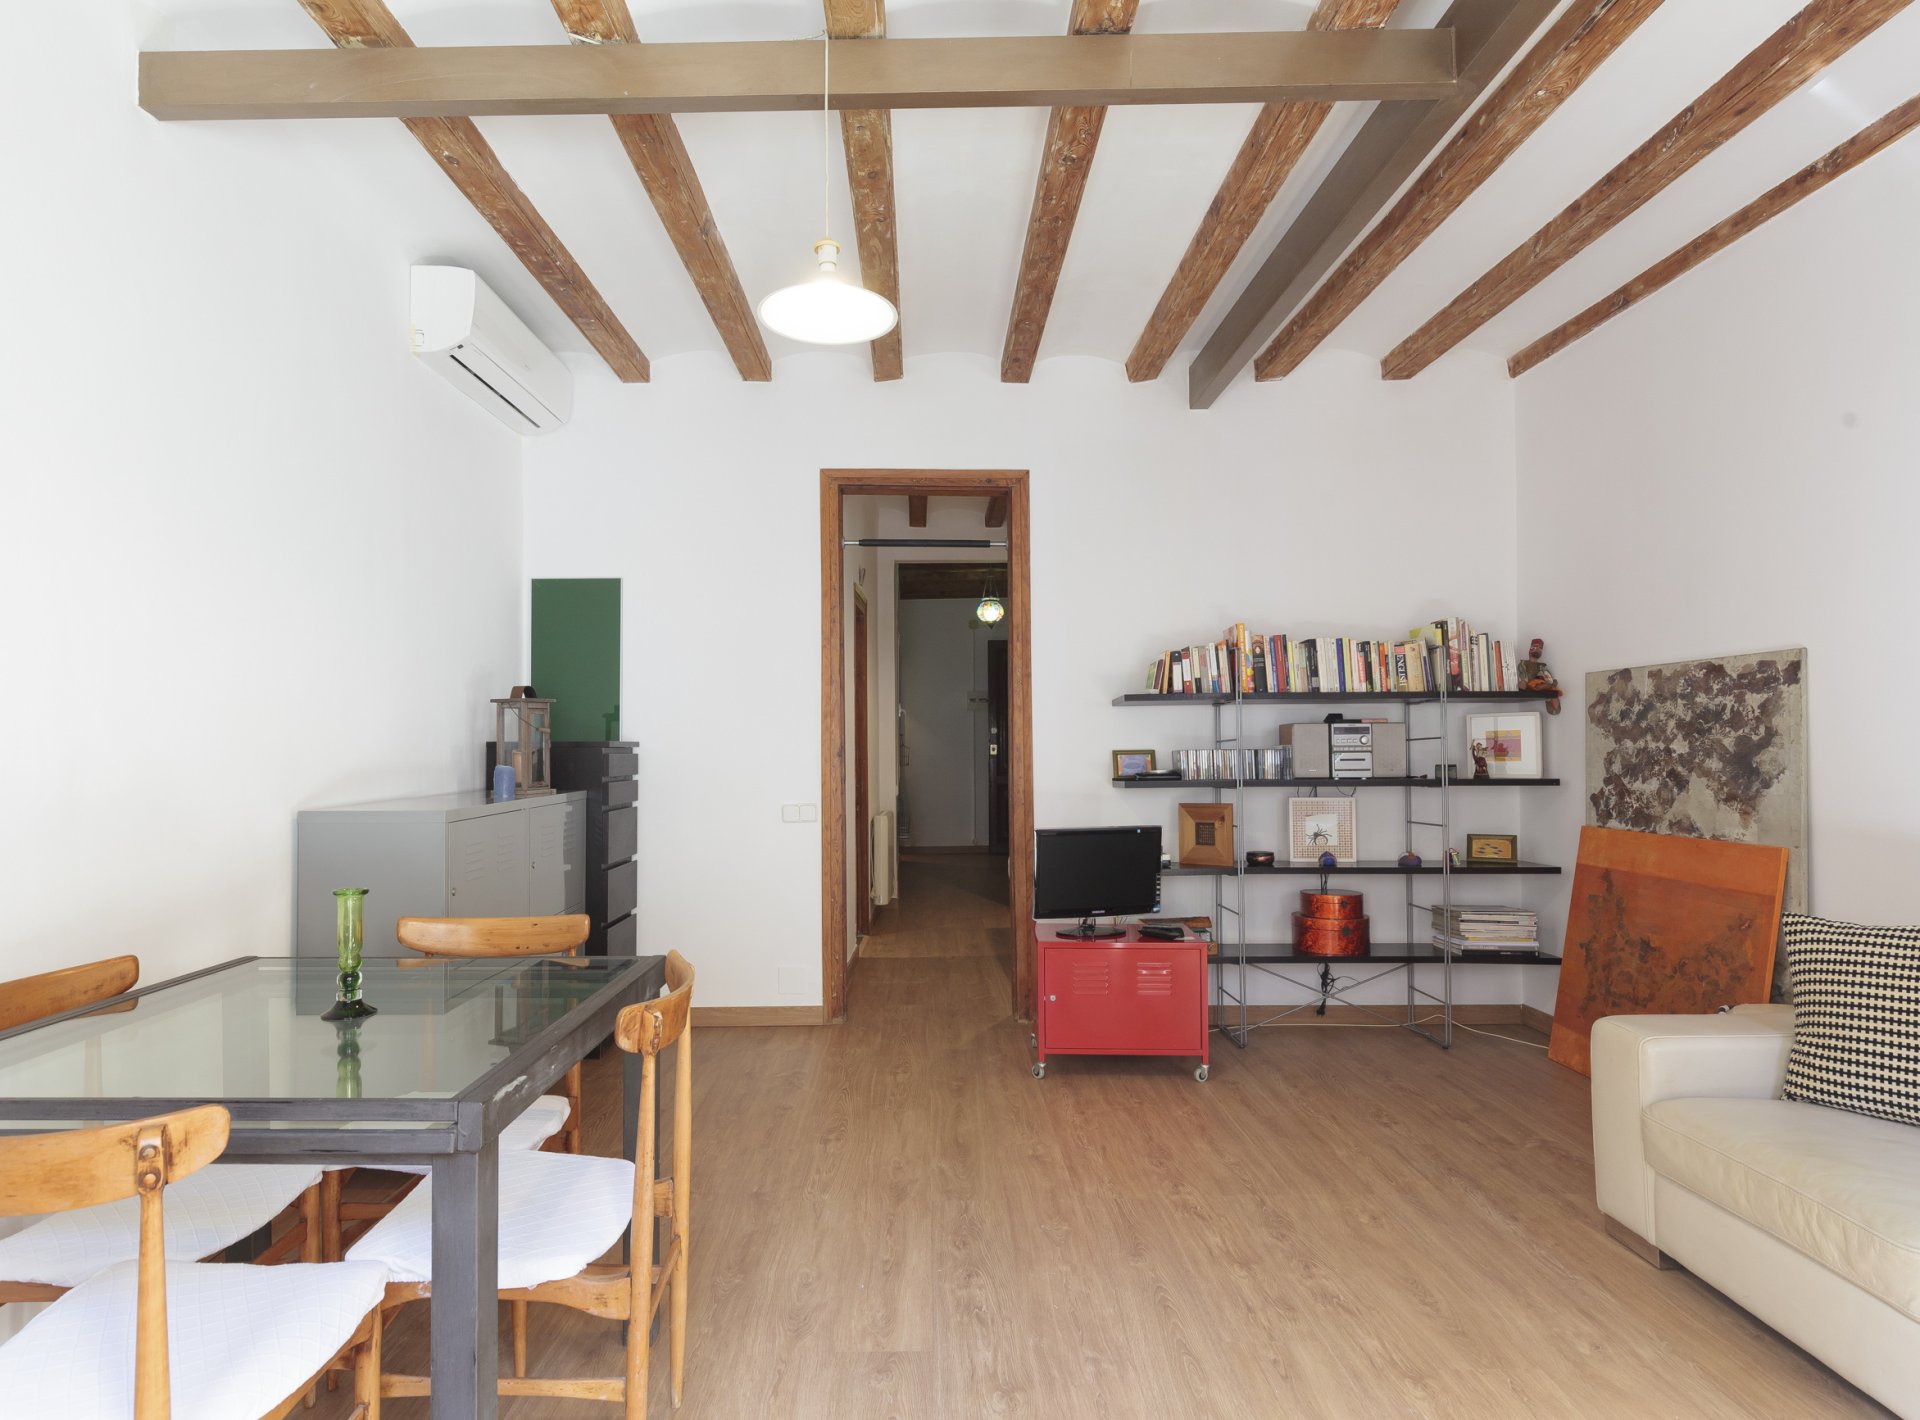 Authentic flat in Poble Sec - Paralelo